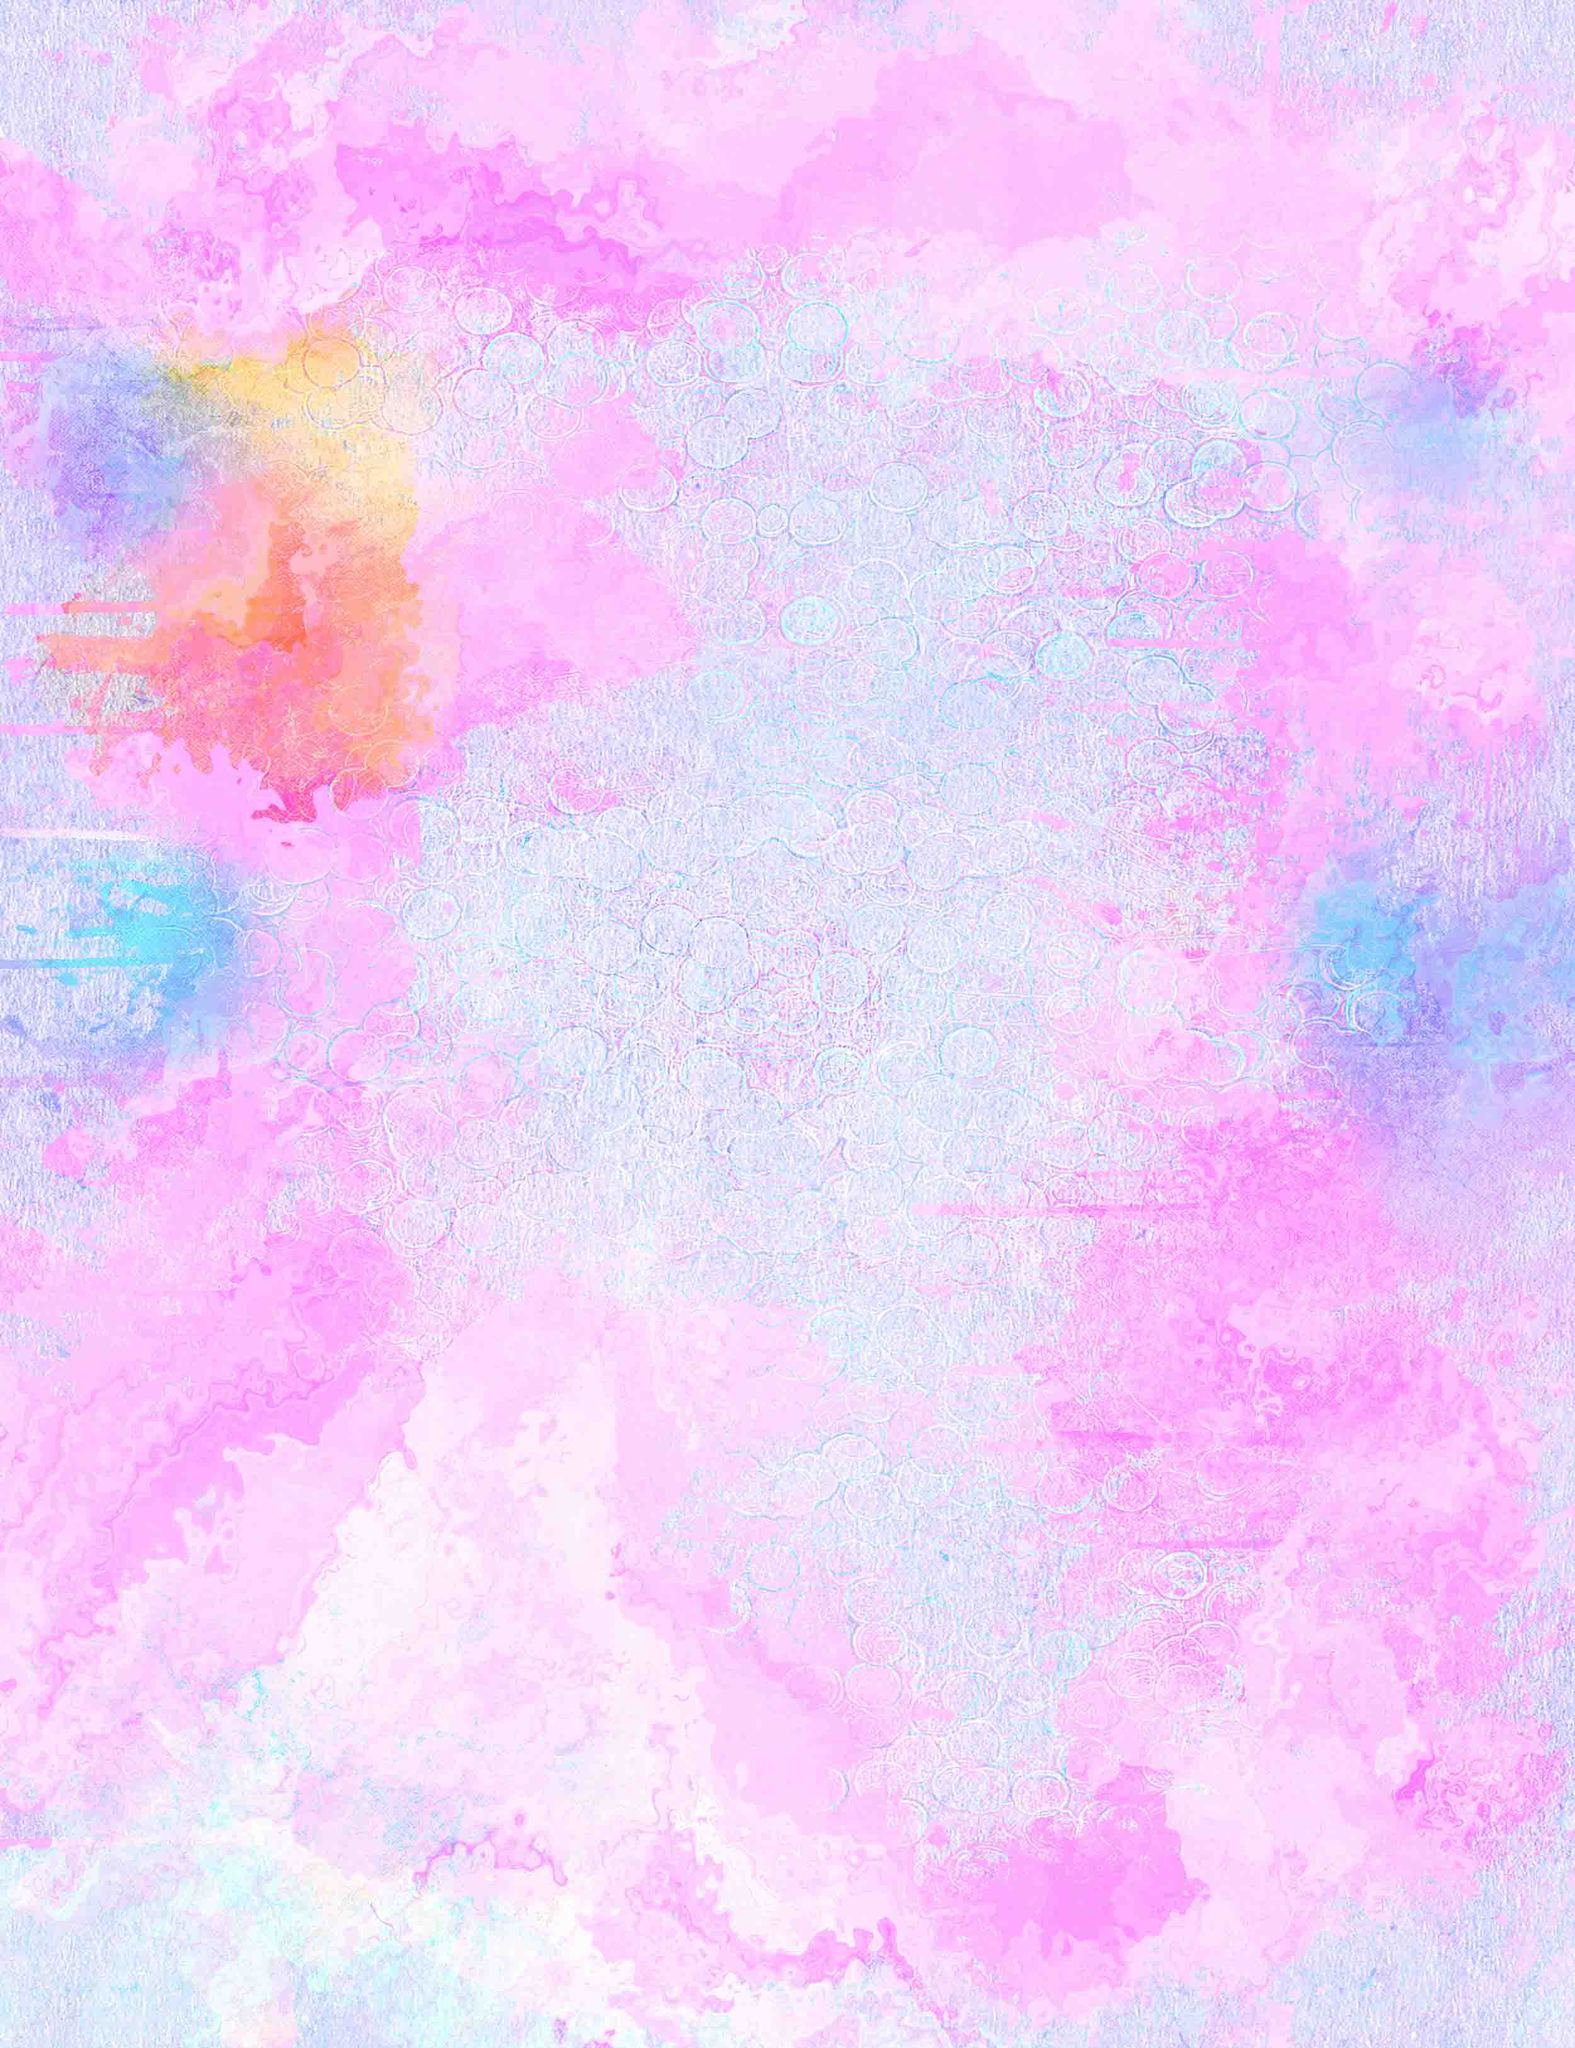 Abstract Pink Watercolor Texture Photograph For Baby Backdrop ...